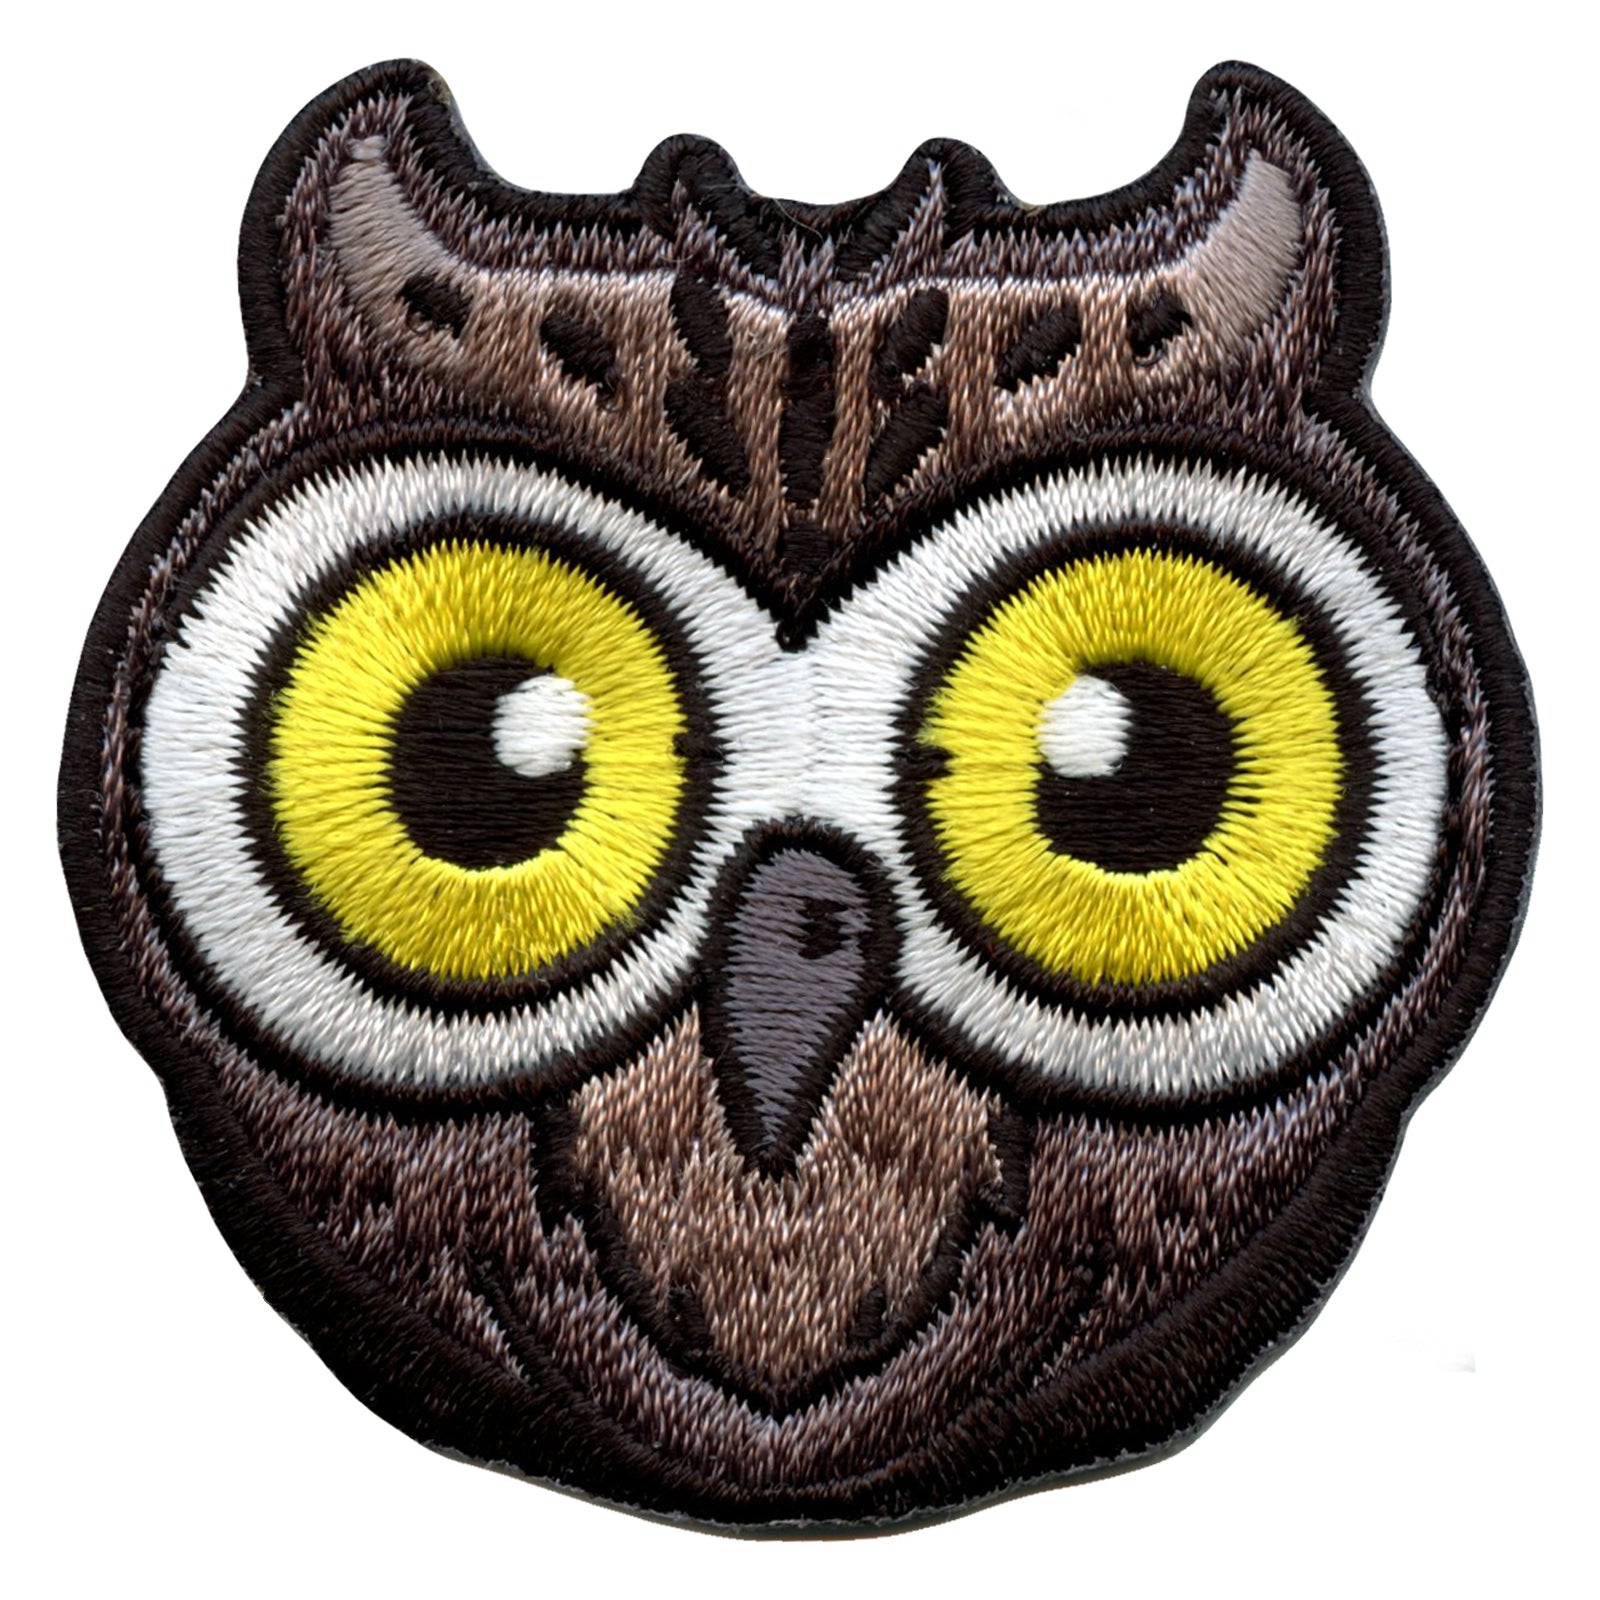 Owl Face With Big Eyes Embroidered Iron On Patch 